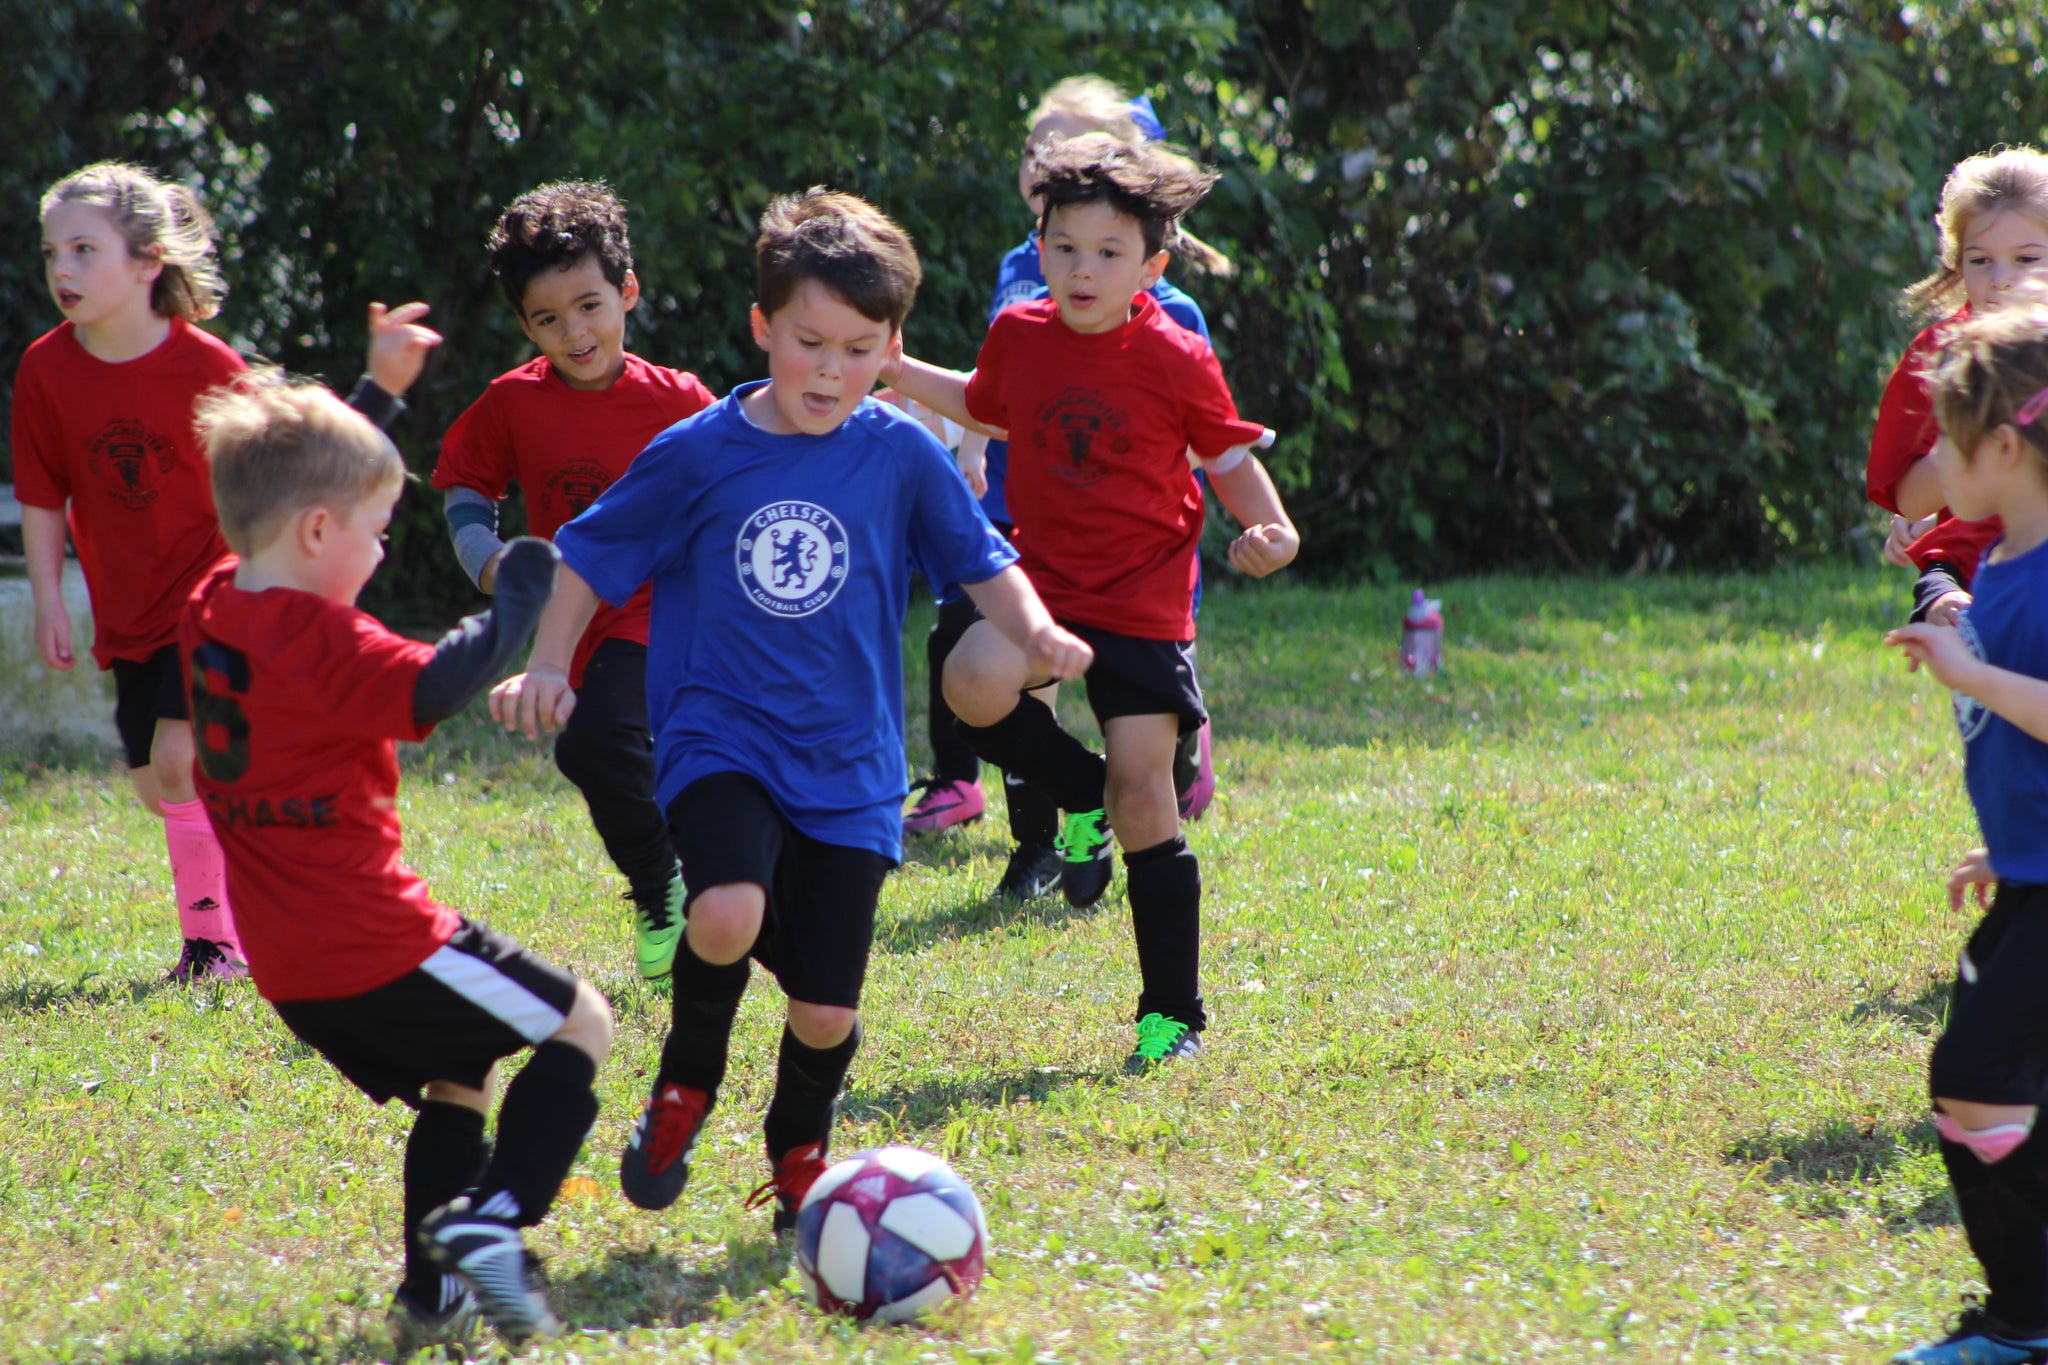 Finding The Right Fit - Questions To Ask When Choosing A Local Soccer Program